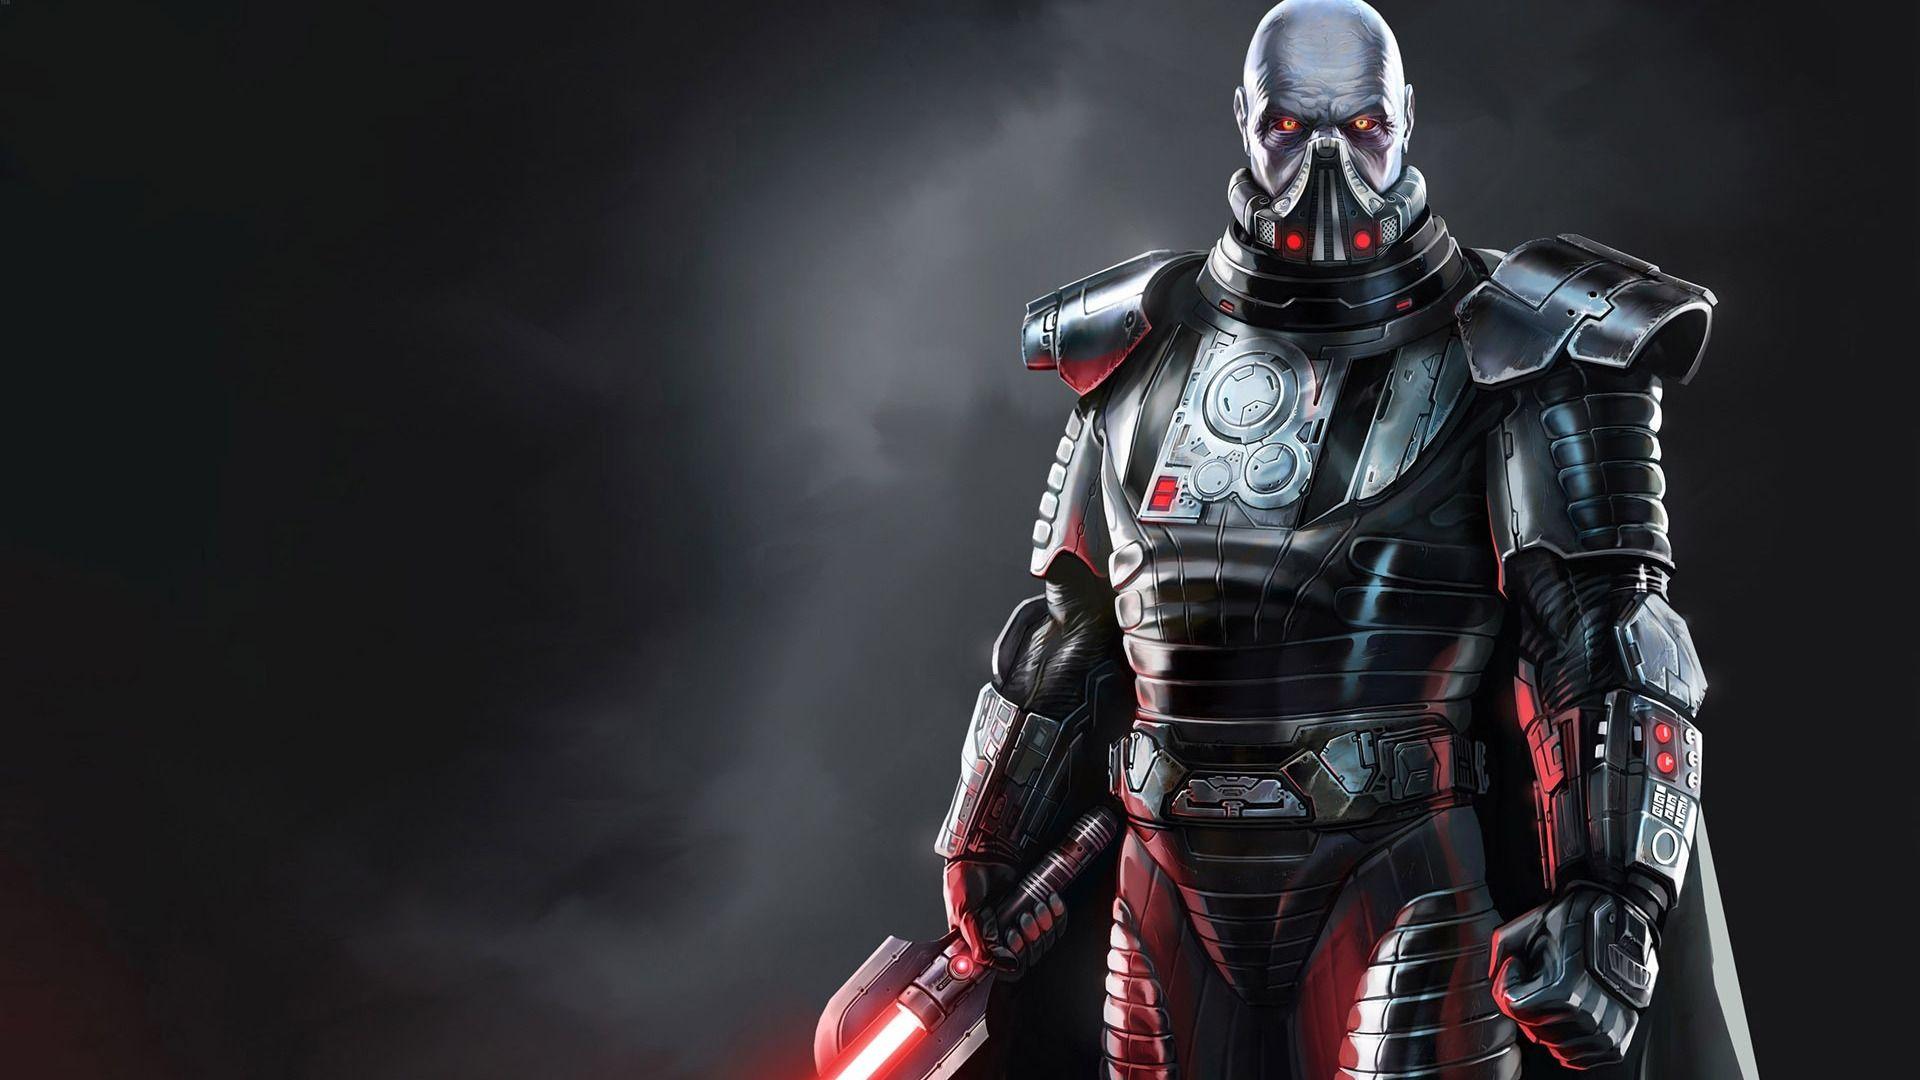 Star Wars The Old Republic – Sith Warrior widescreen wallpapers